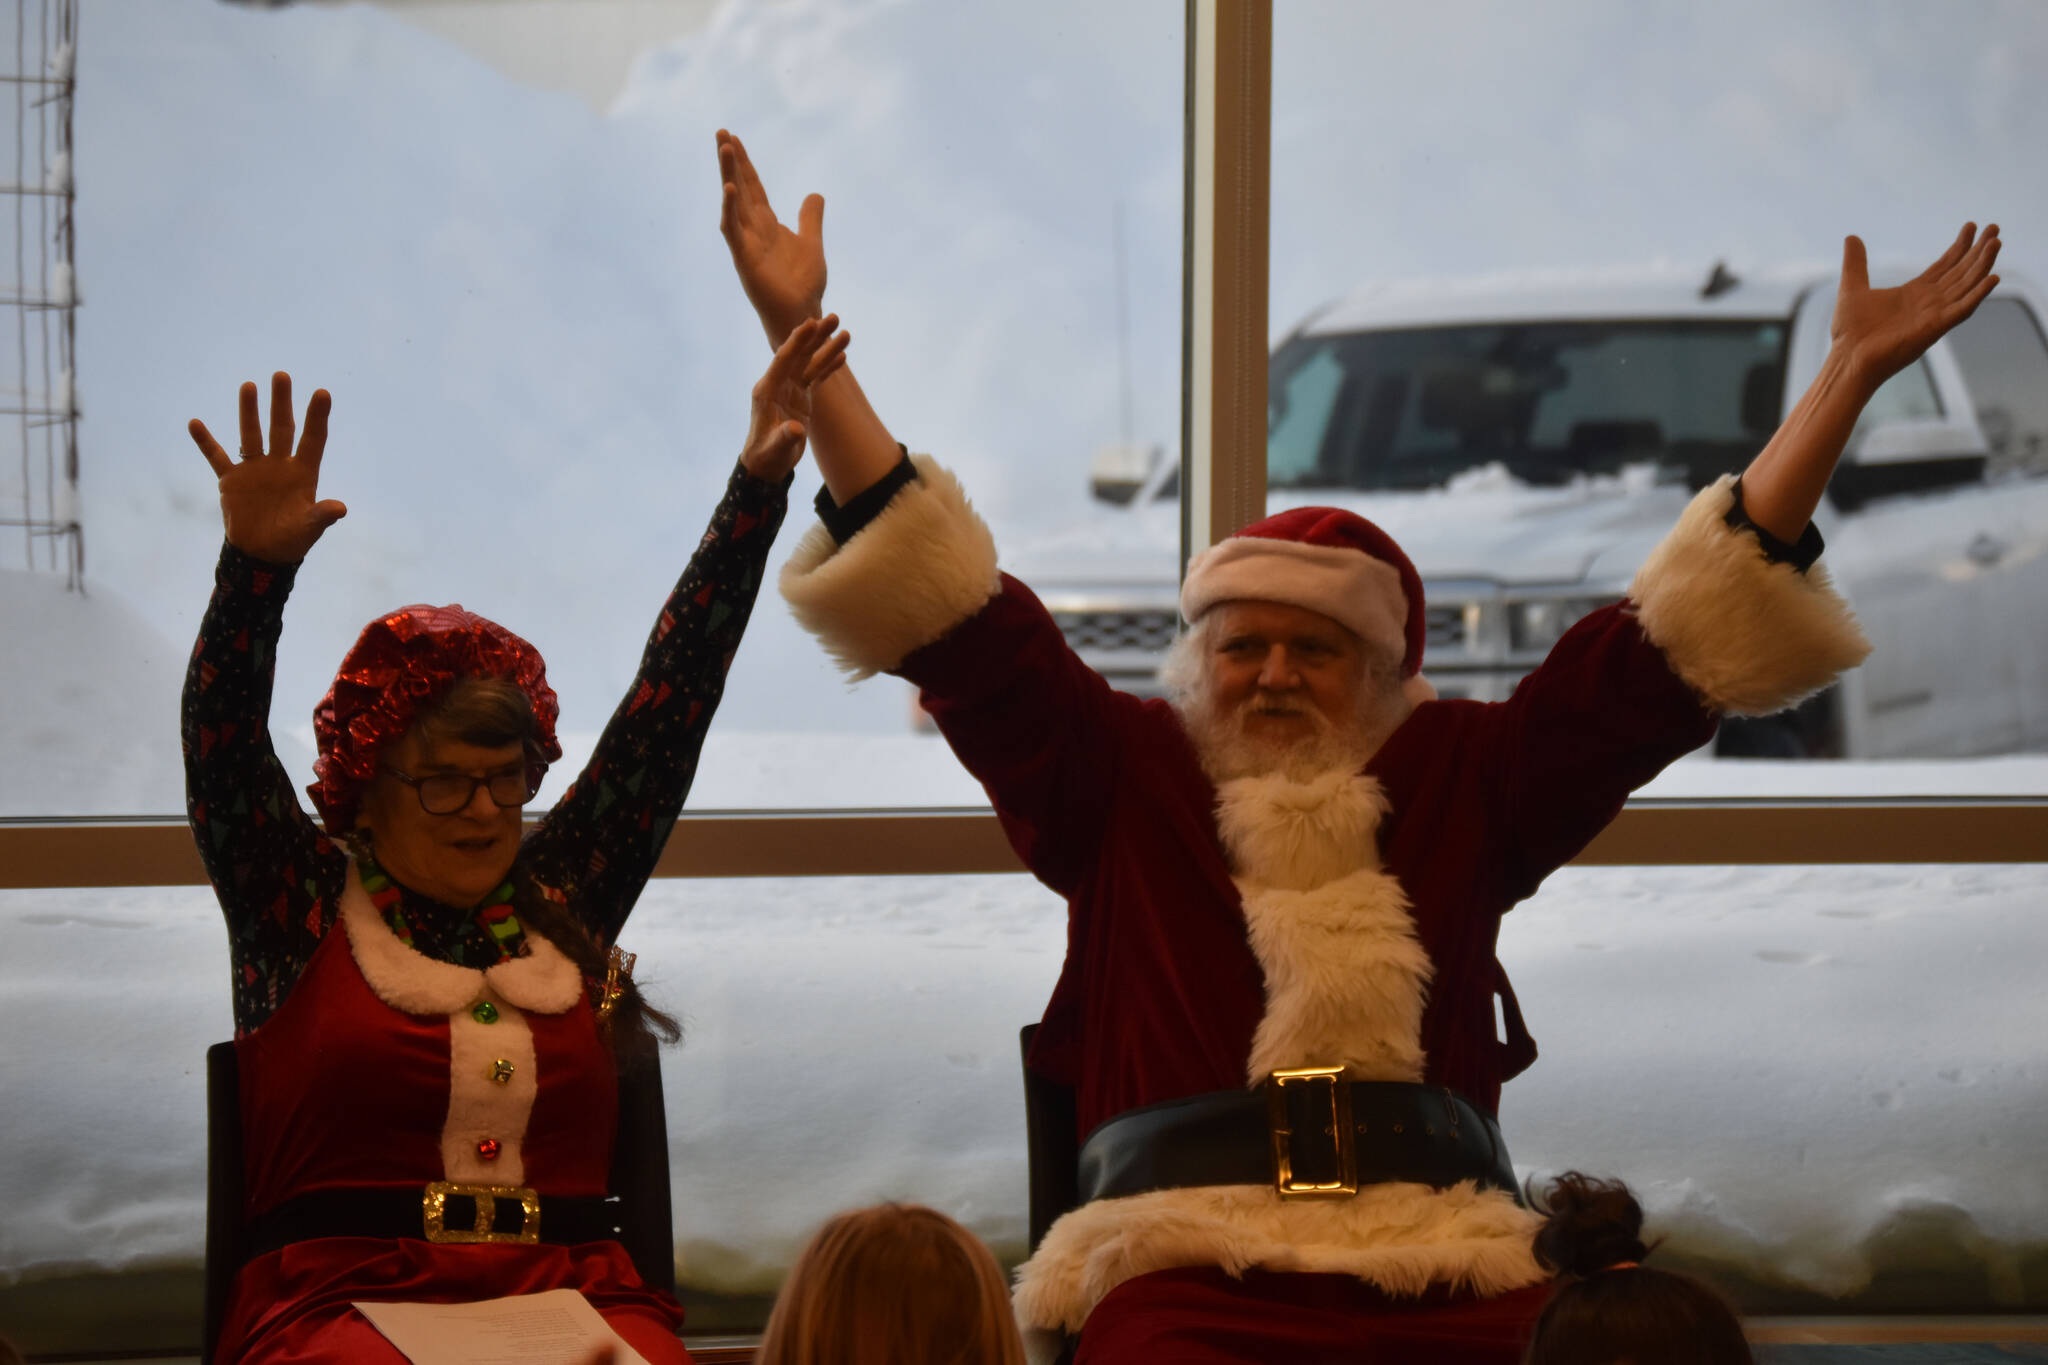 Mrs. Claus (Kit Hill) and Santa (Ken Aaron) raise their arms as they participate in a song during Story Time with Mrs. Claus at the Kenai Community Library in Kenai, Alaska, on Monday, Dec. 19, 2022. (Jake Dye/Peninsula Clarion)